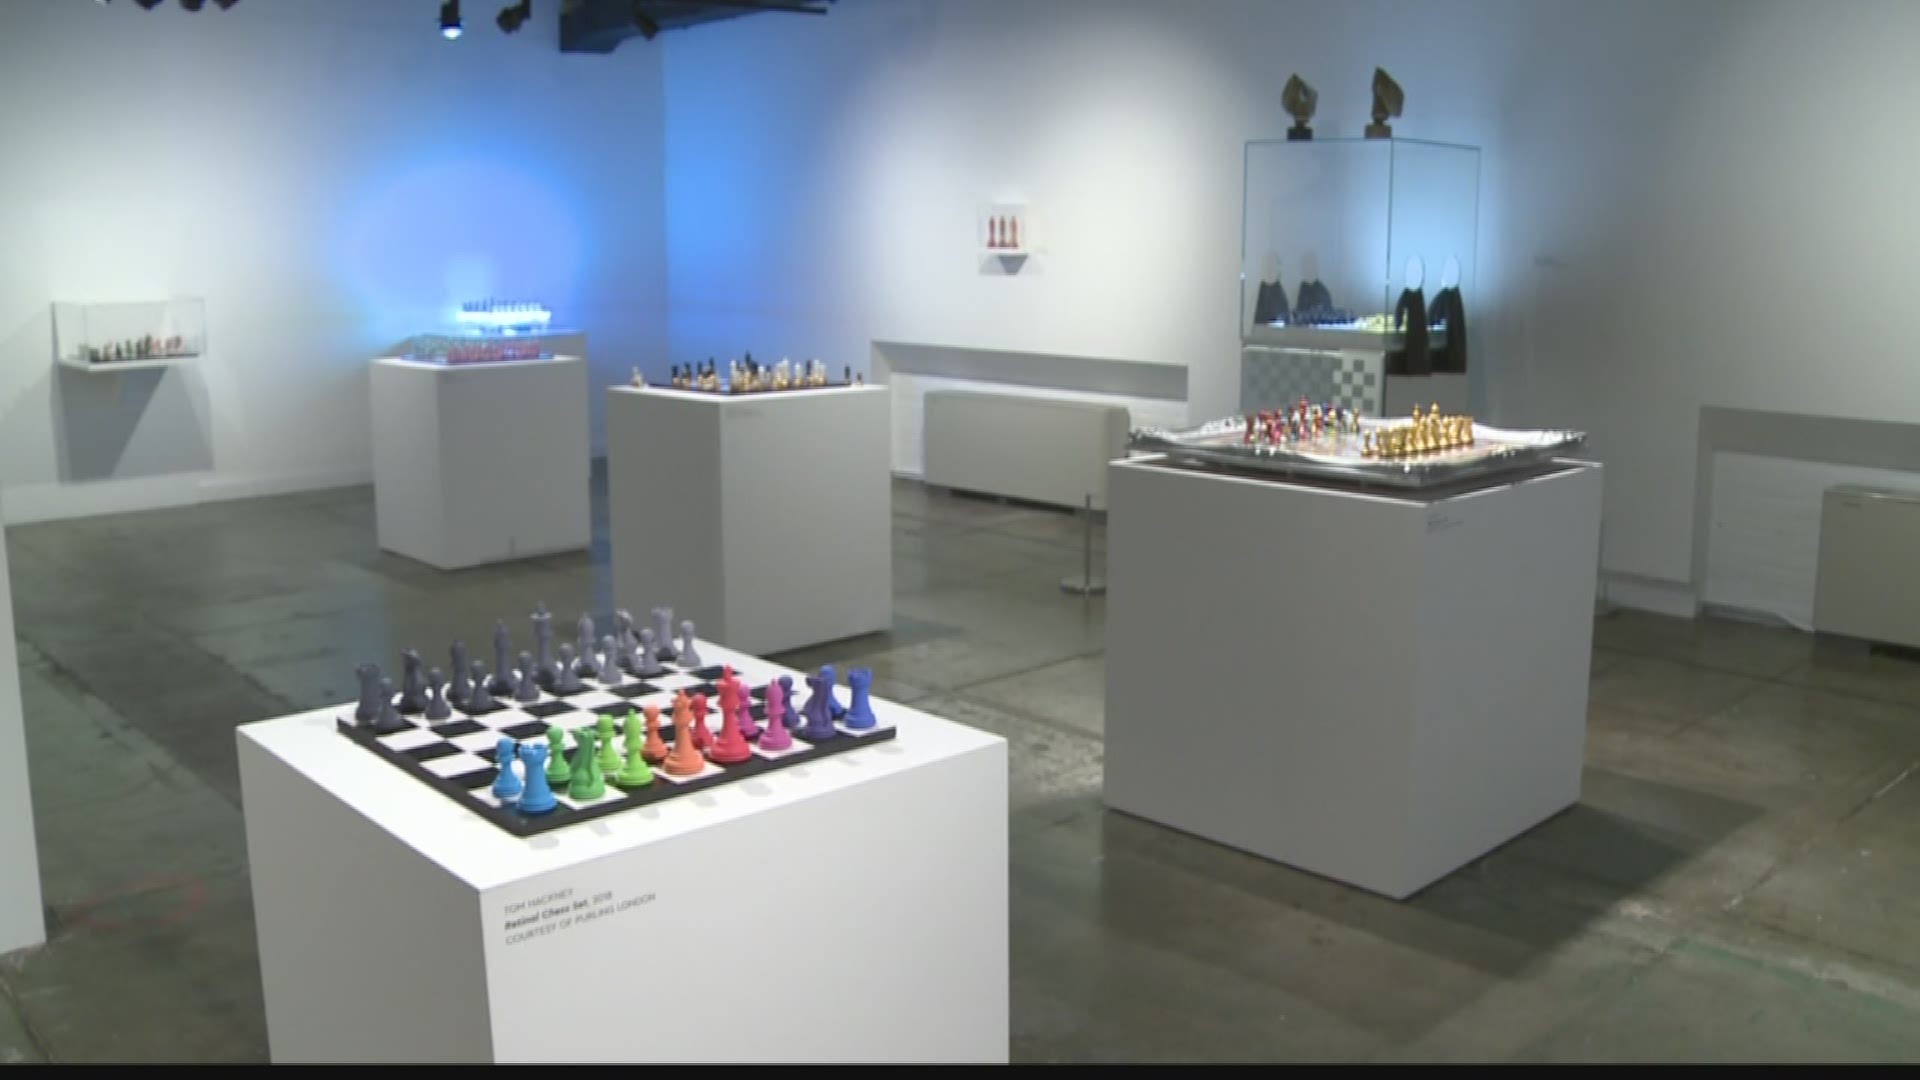 There's a cool exhibit happening now at the World Chess Hall of Fame. 